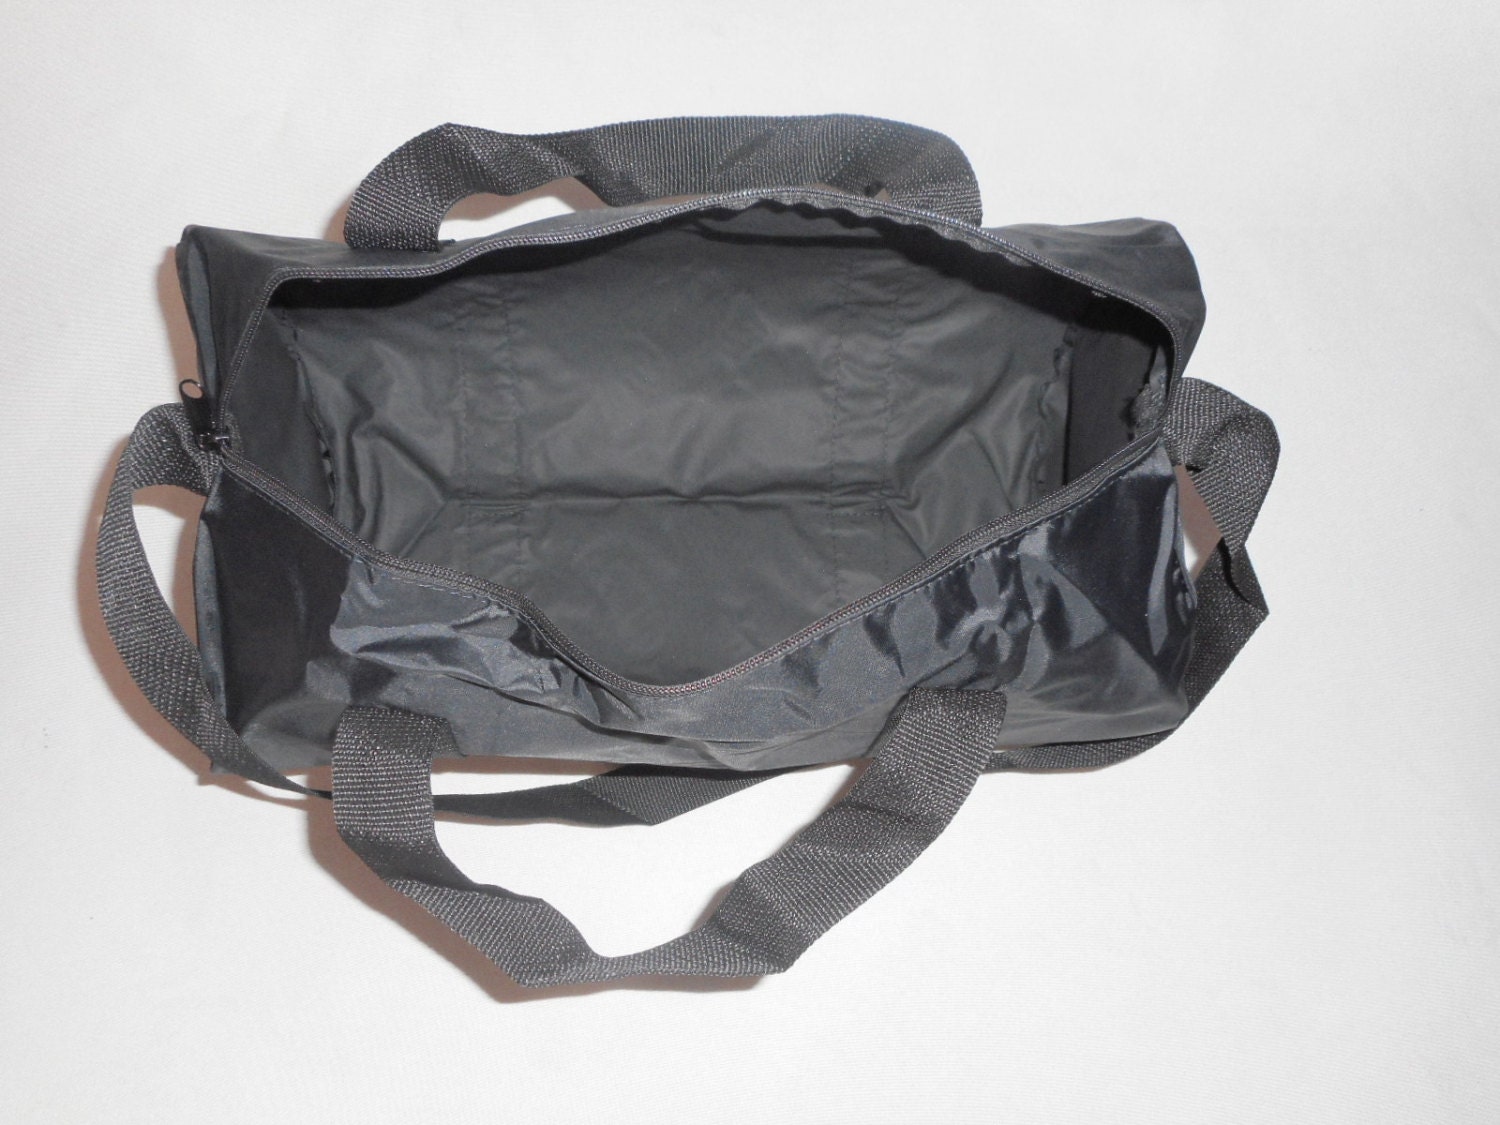 Roll Bag Large Gym Bagovernight Bag for Beachcamping or Work - Etsy